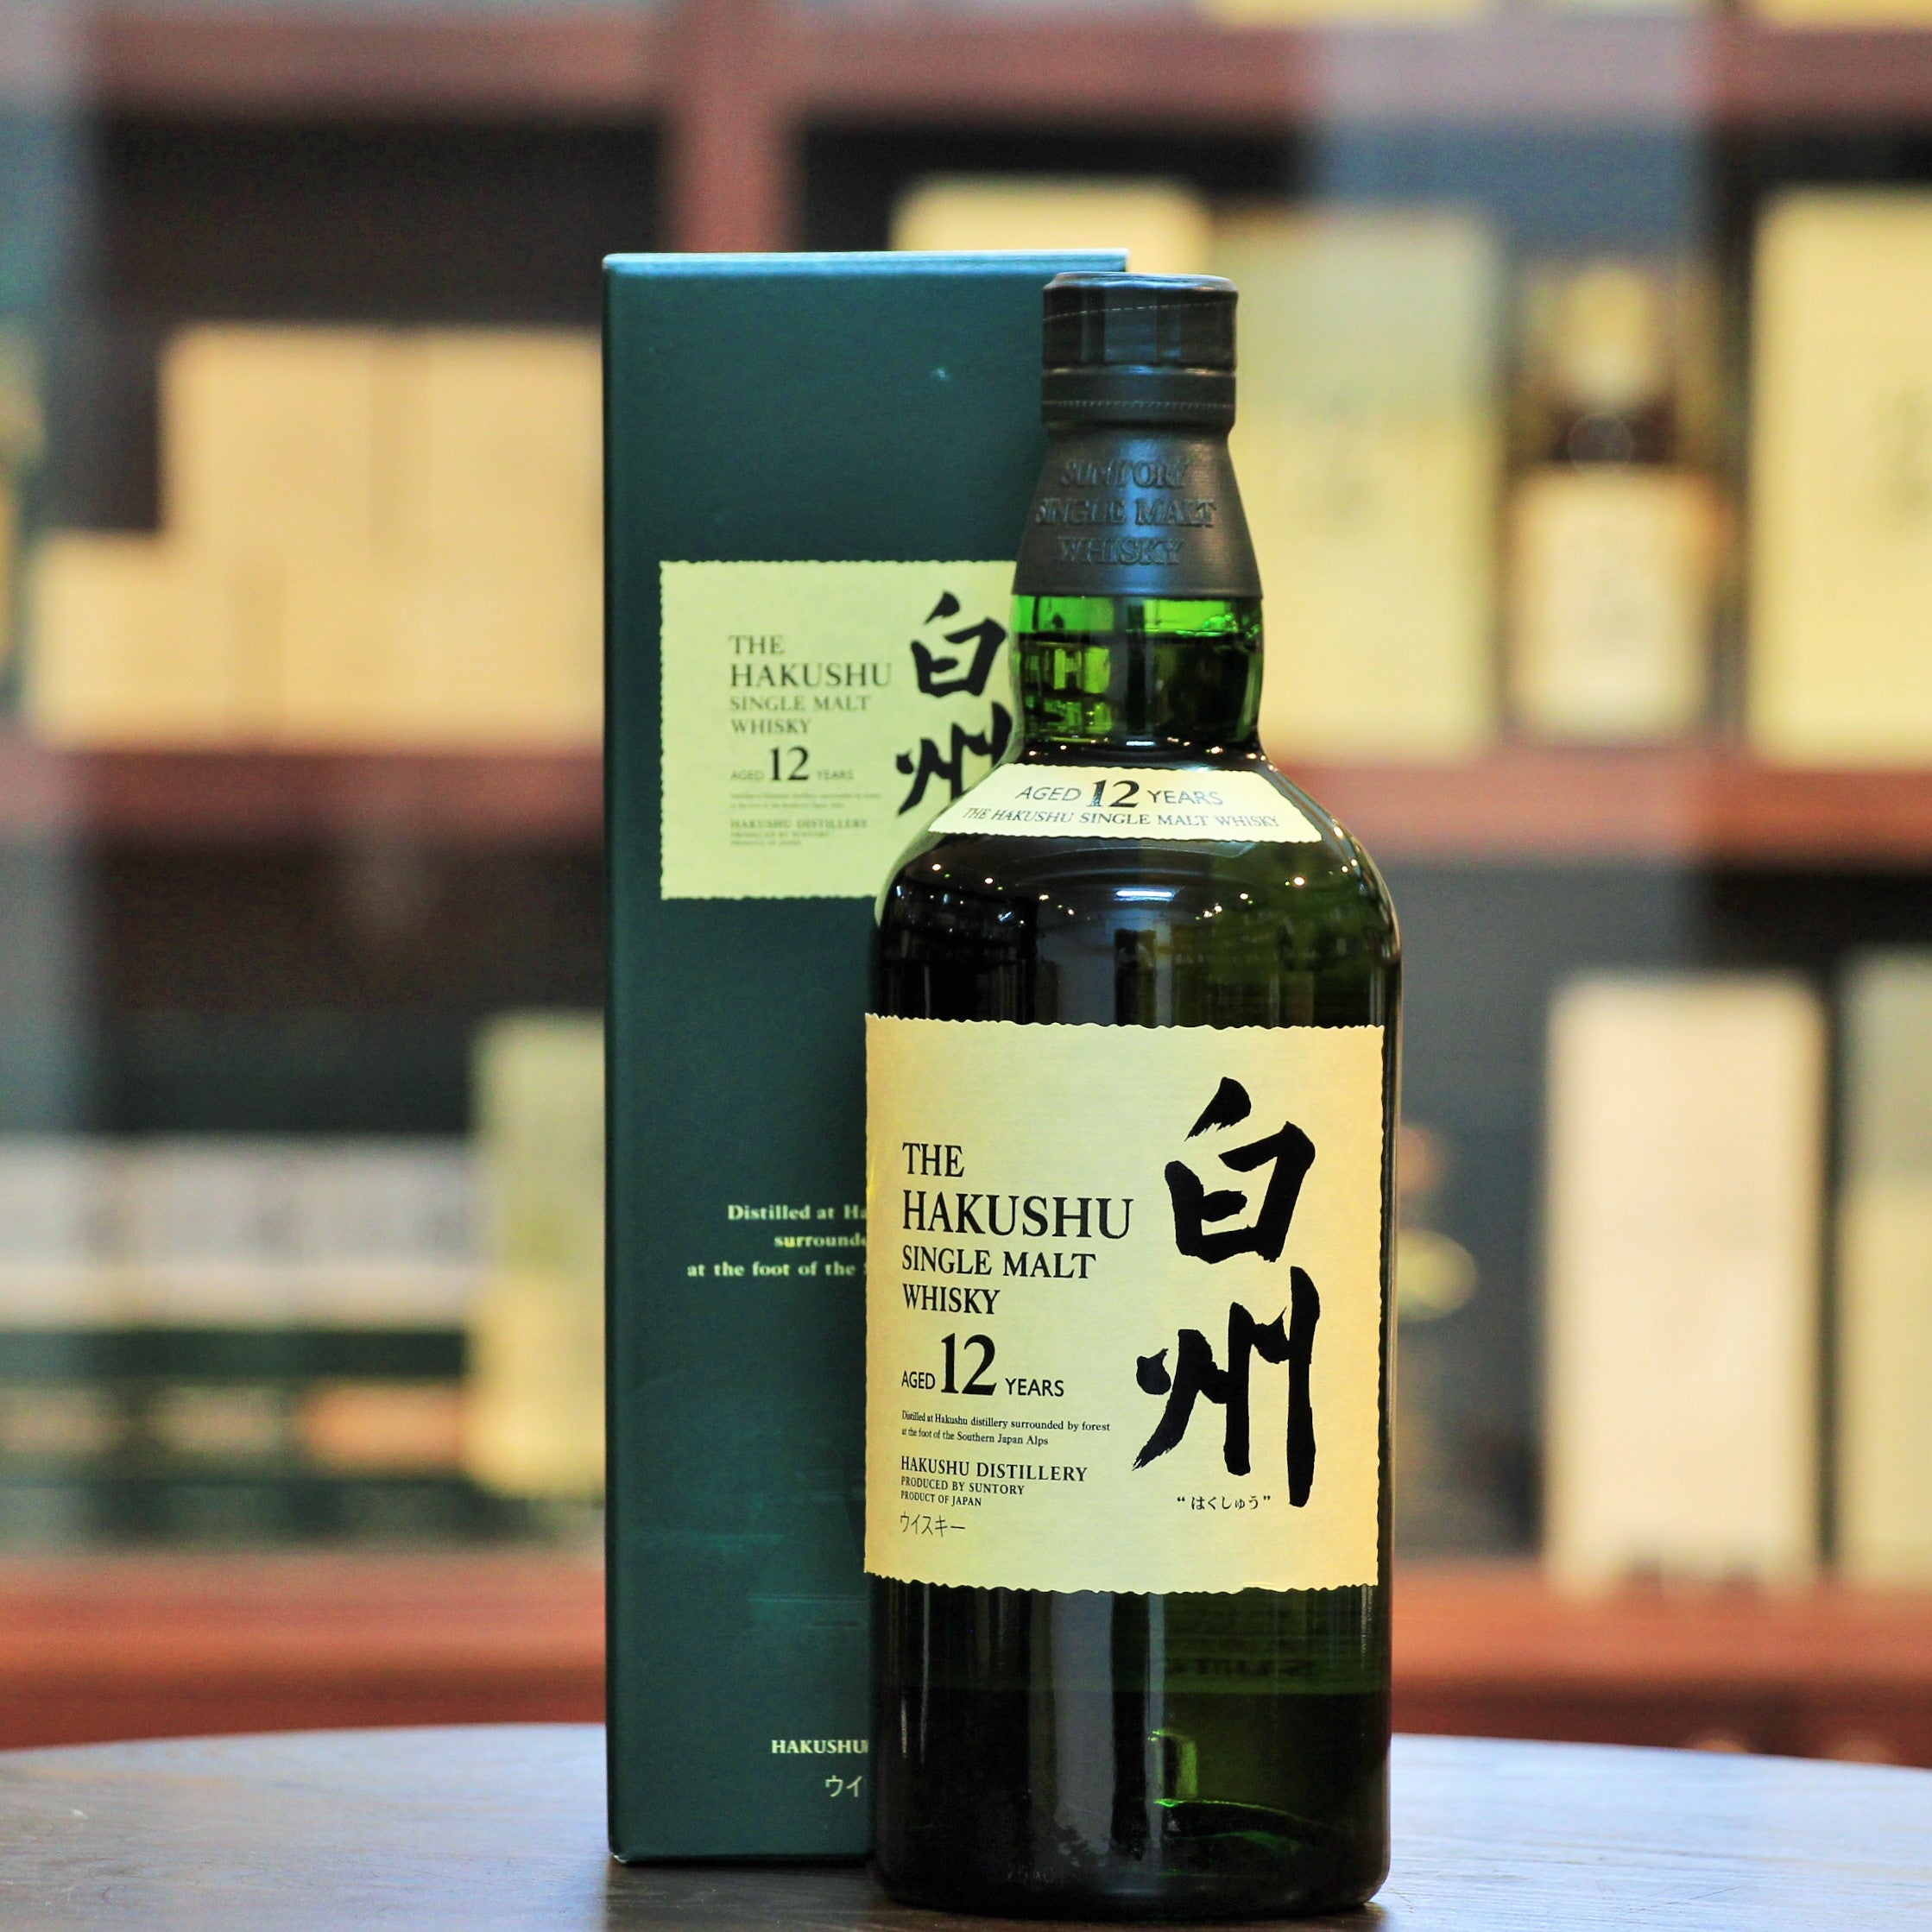 Hakushu 12 Years Single Malt Japanese Whisky (Discontinued), The lightly peated bottling from the Suntory stable, the aged 12 years Hakushu has been discontinued since 2018.